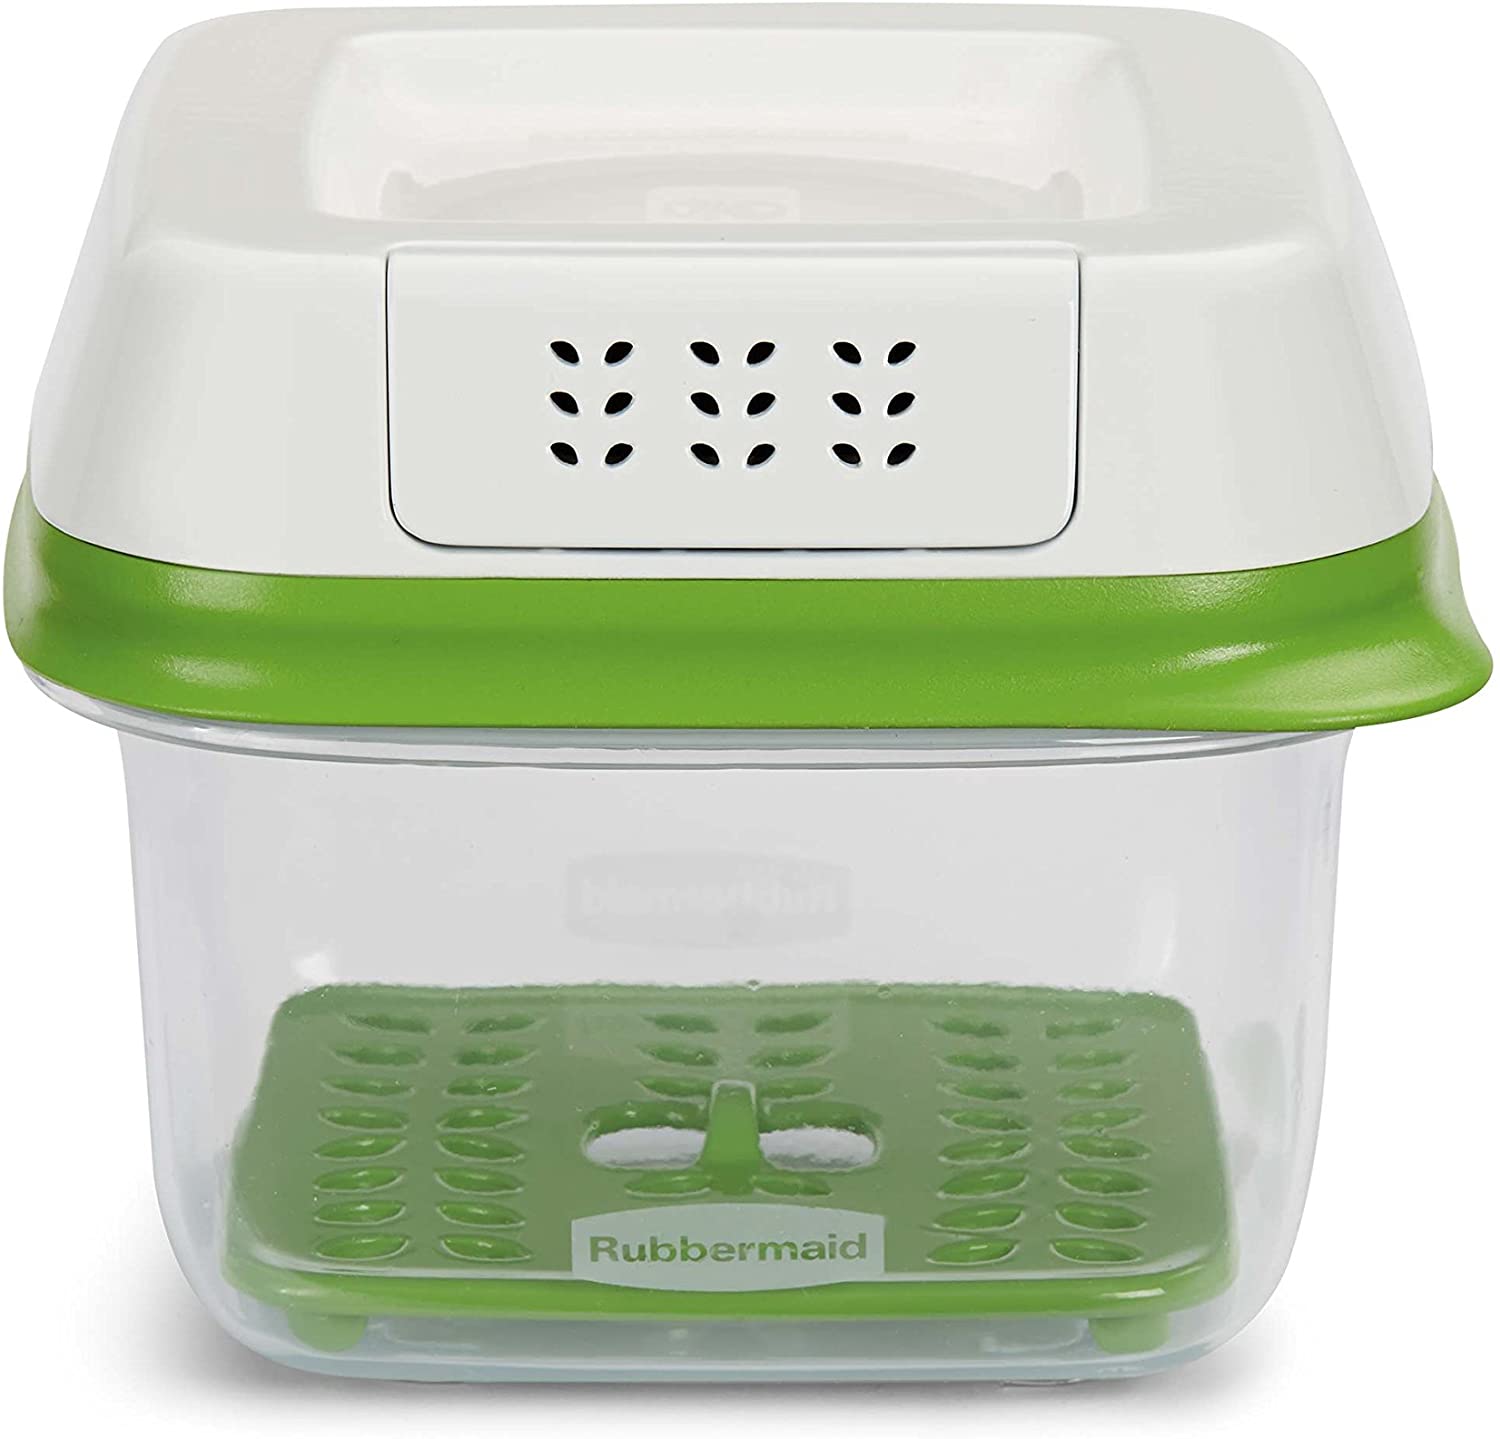 Rubbermaid FreshWorks Small Square Food Storage Container, 591 ml - Whole and All